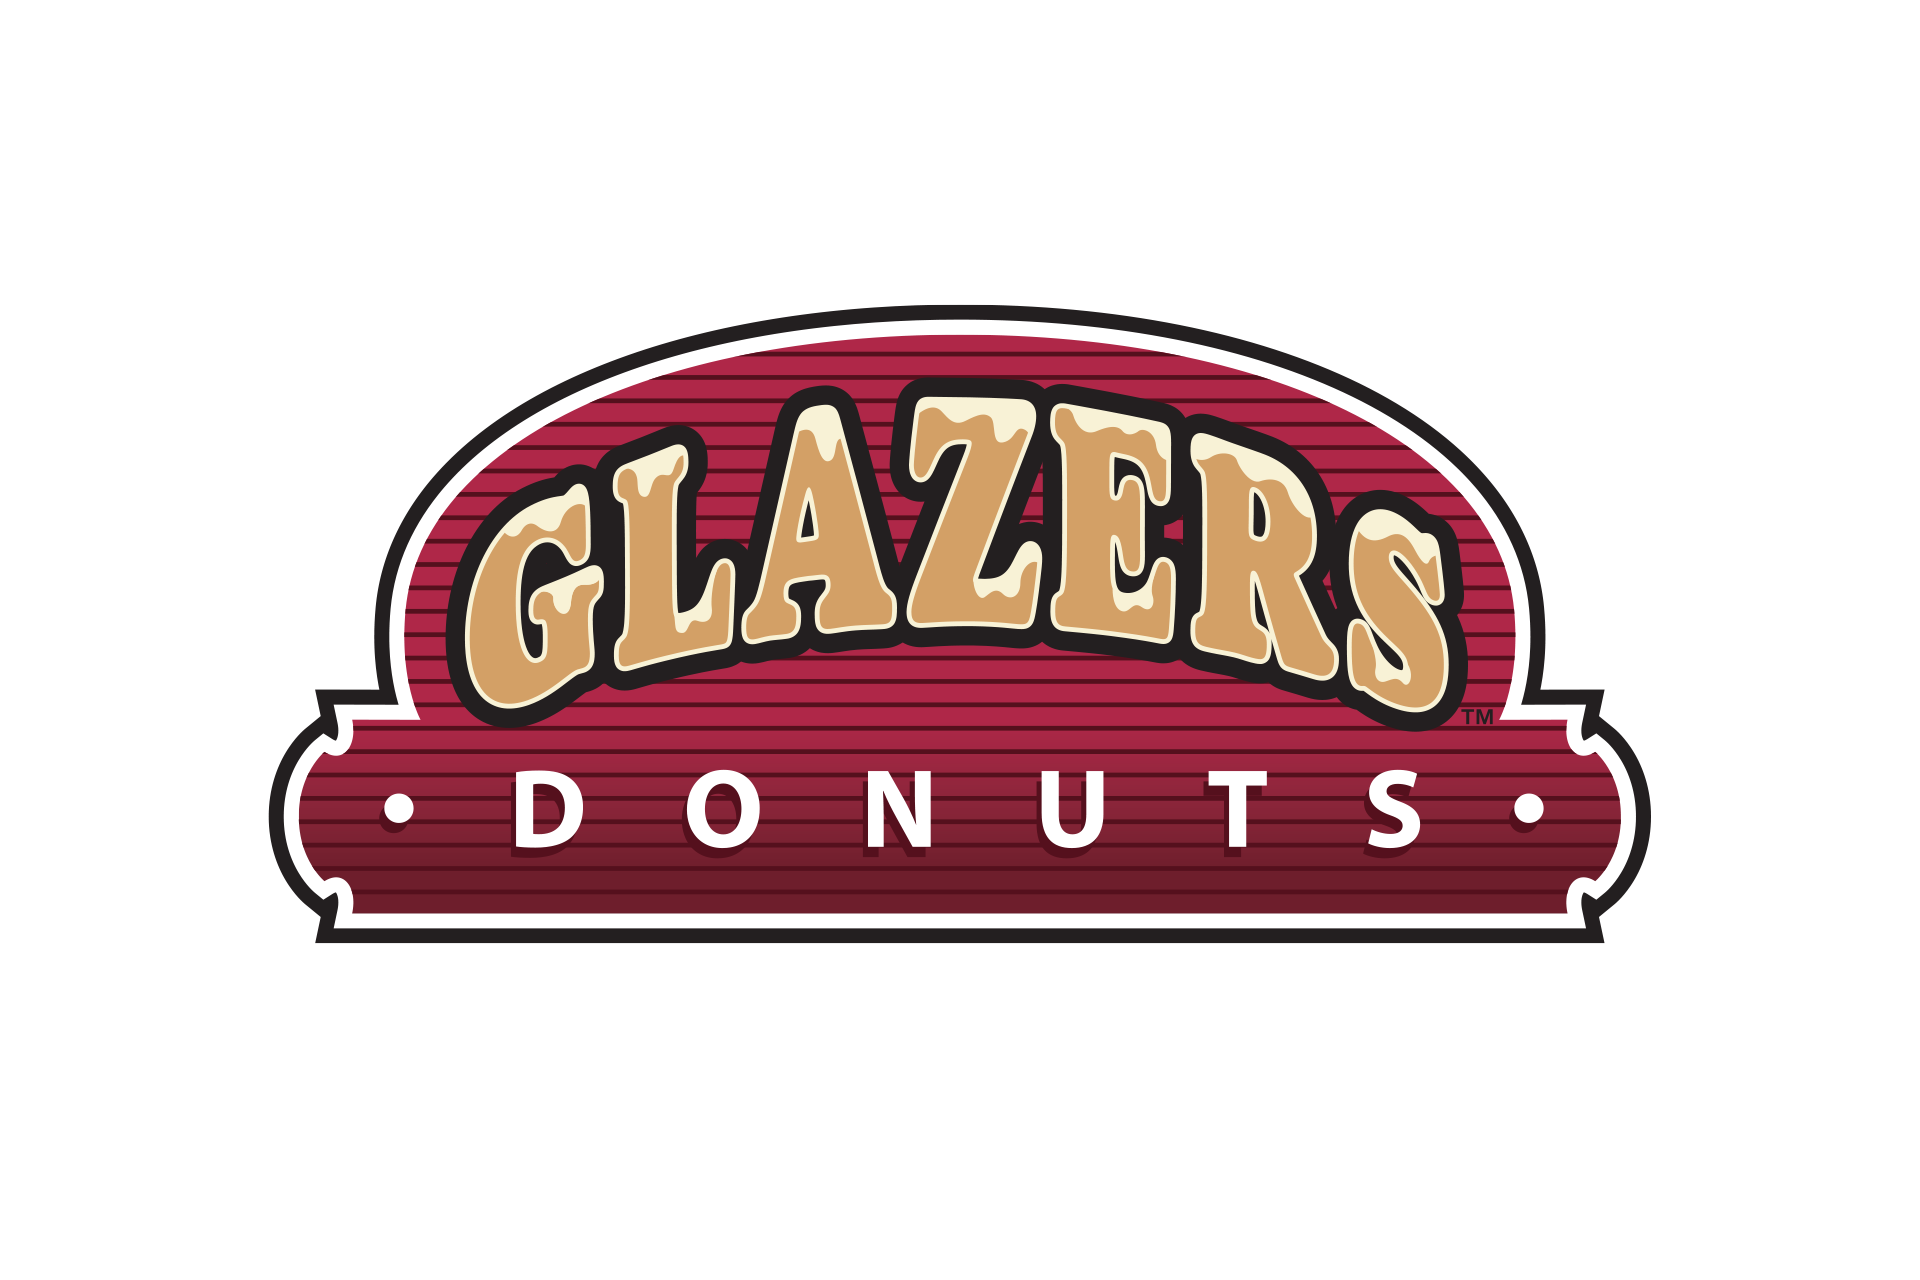 Glazers Donuts color logo, created by Vendi Advertising